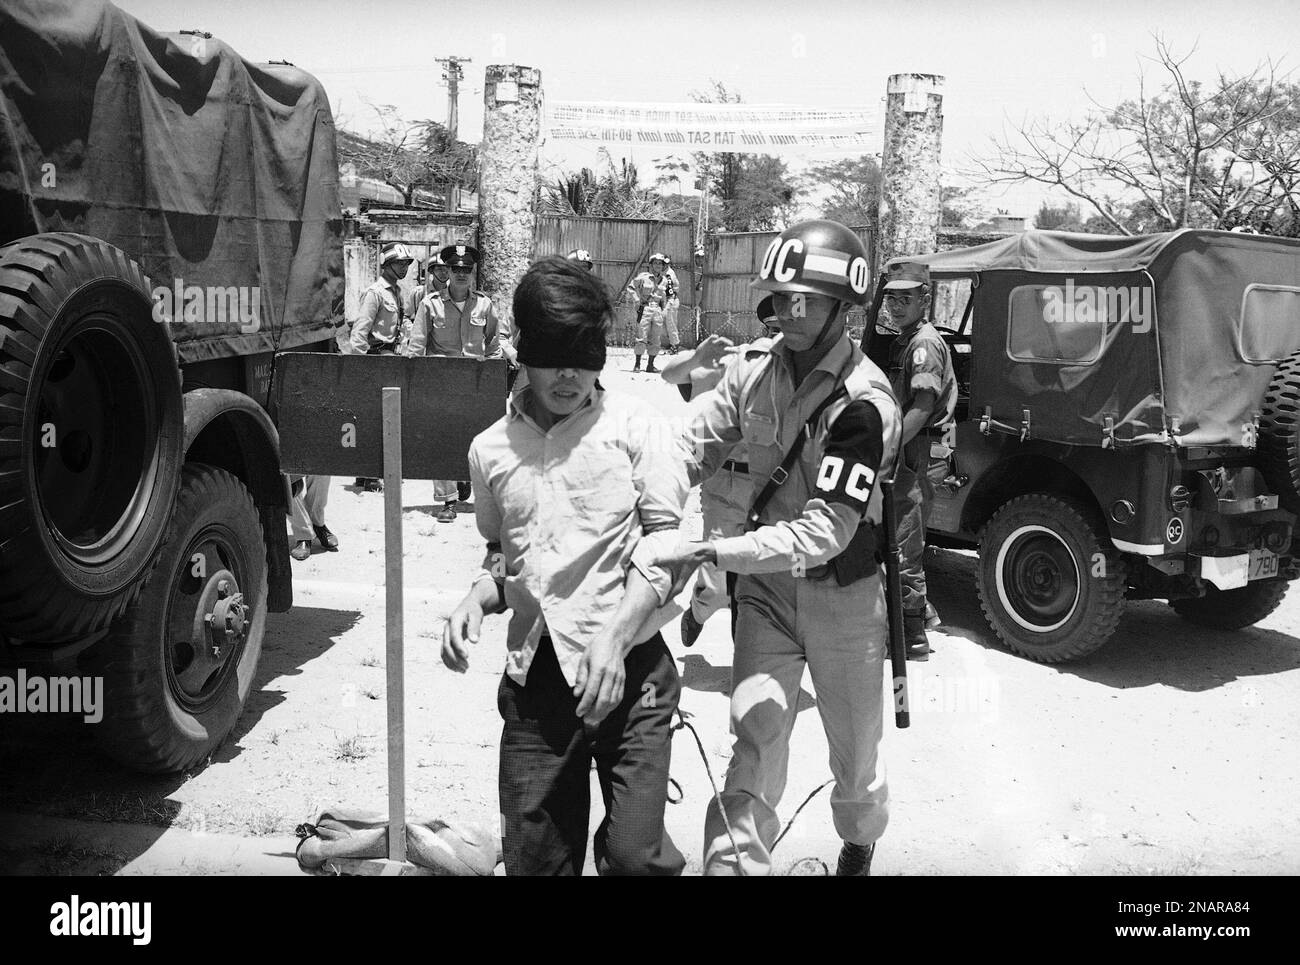 Viet Cong terrorist Le Dau, 24, is blindfolded as he is led to stake at which he was executed by a firing squad in Da Nang, April 15, 1965. He was convicted of attempting to blow up a hotel occupied by Americans in Da Nang on April 4. (AP Photo/Eddie Adams) Stockfoto